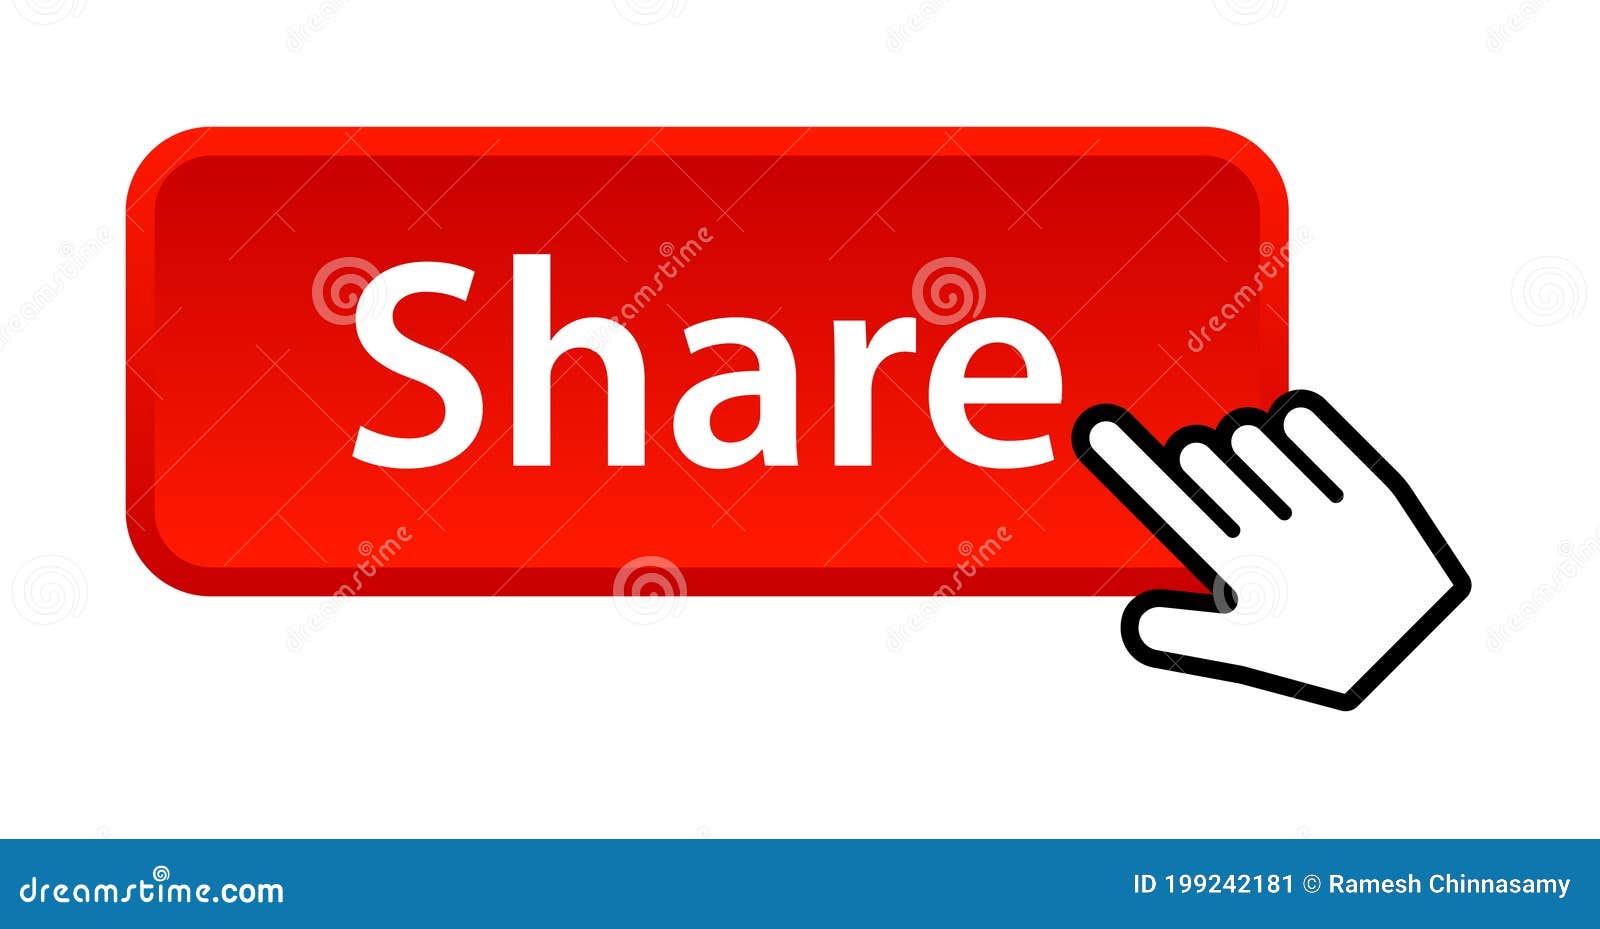 Share button stock vector. Illustration of information - 199242181